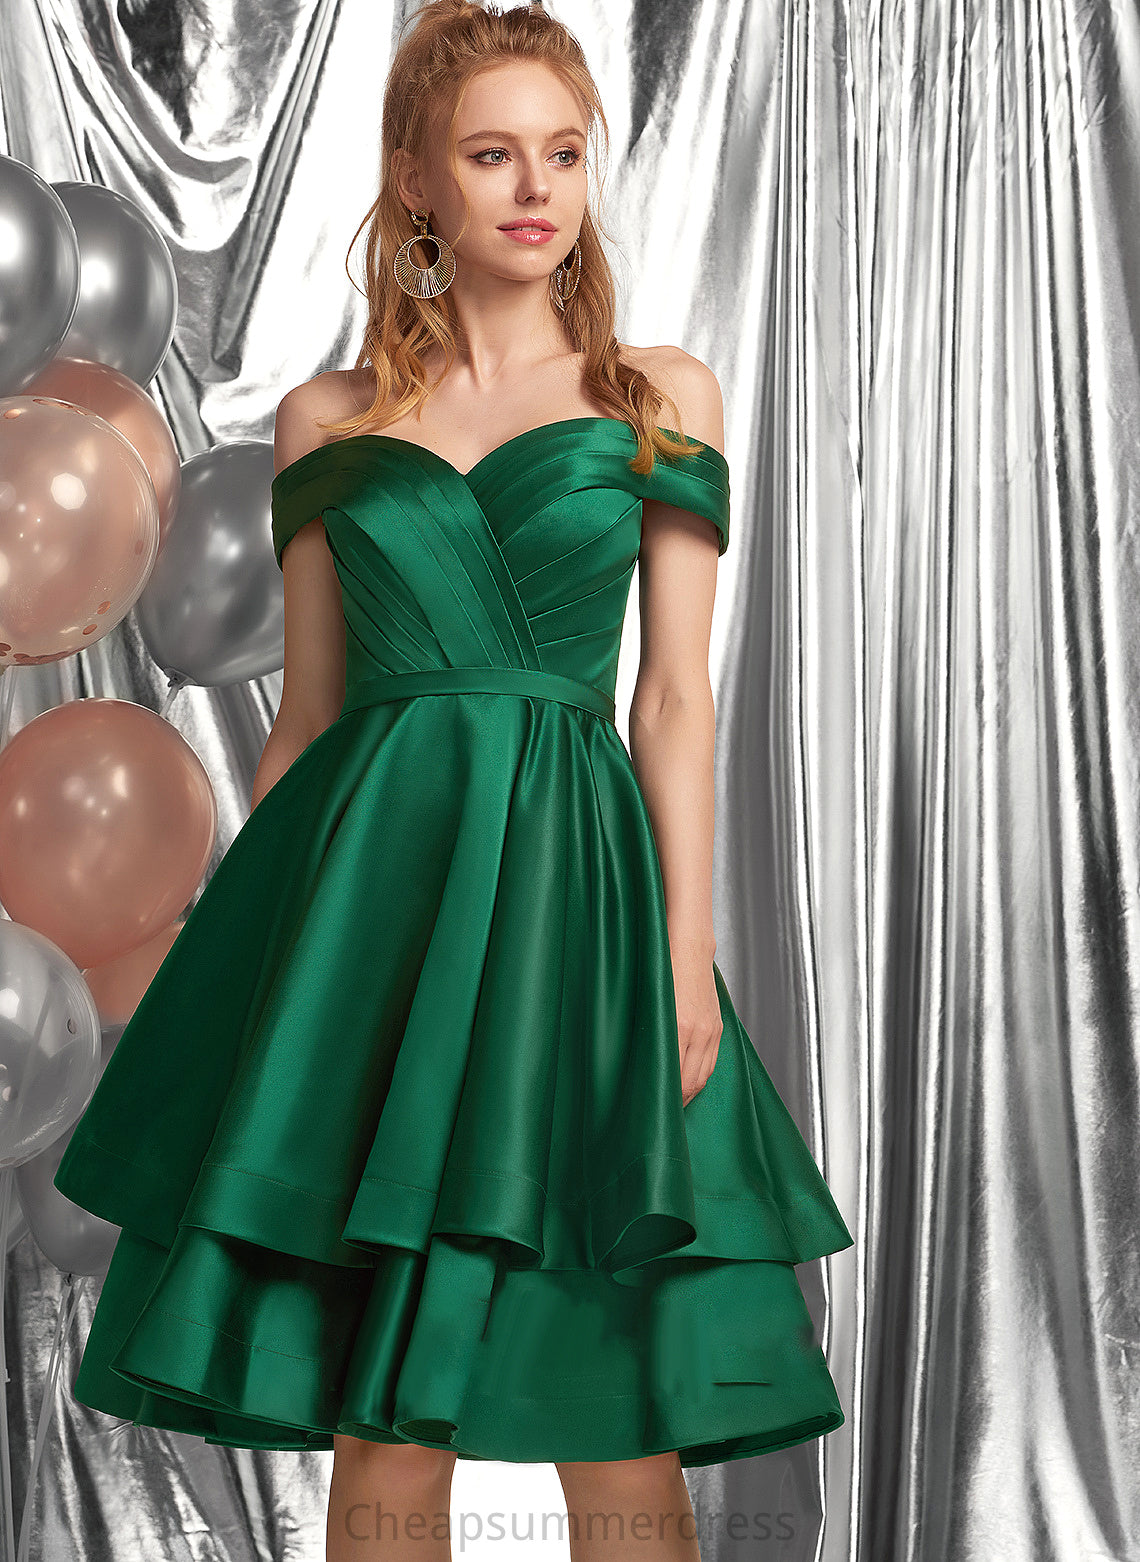 Satin Prom Dresses With Ruffle A-Line Knee-Length Off-the-Shoulder Kendra